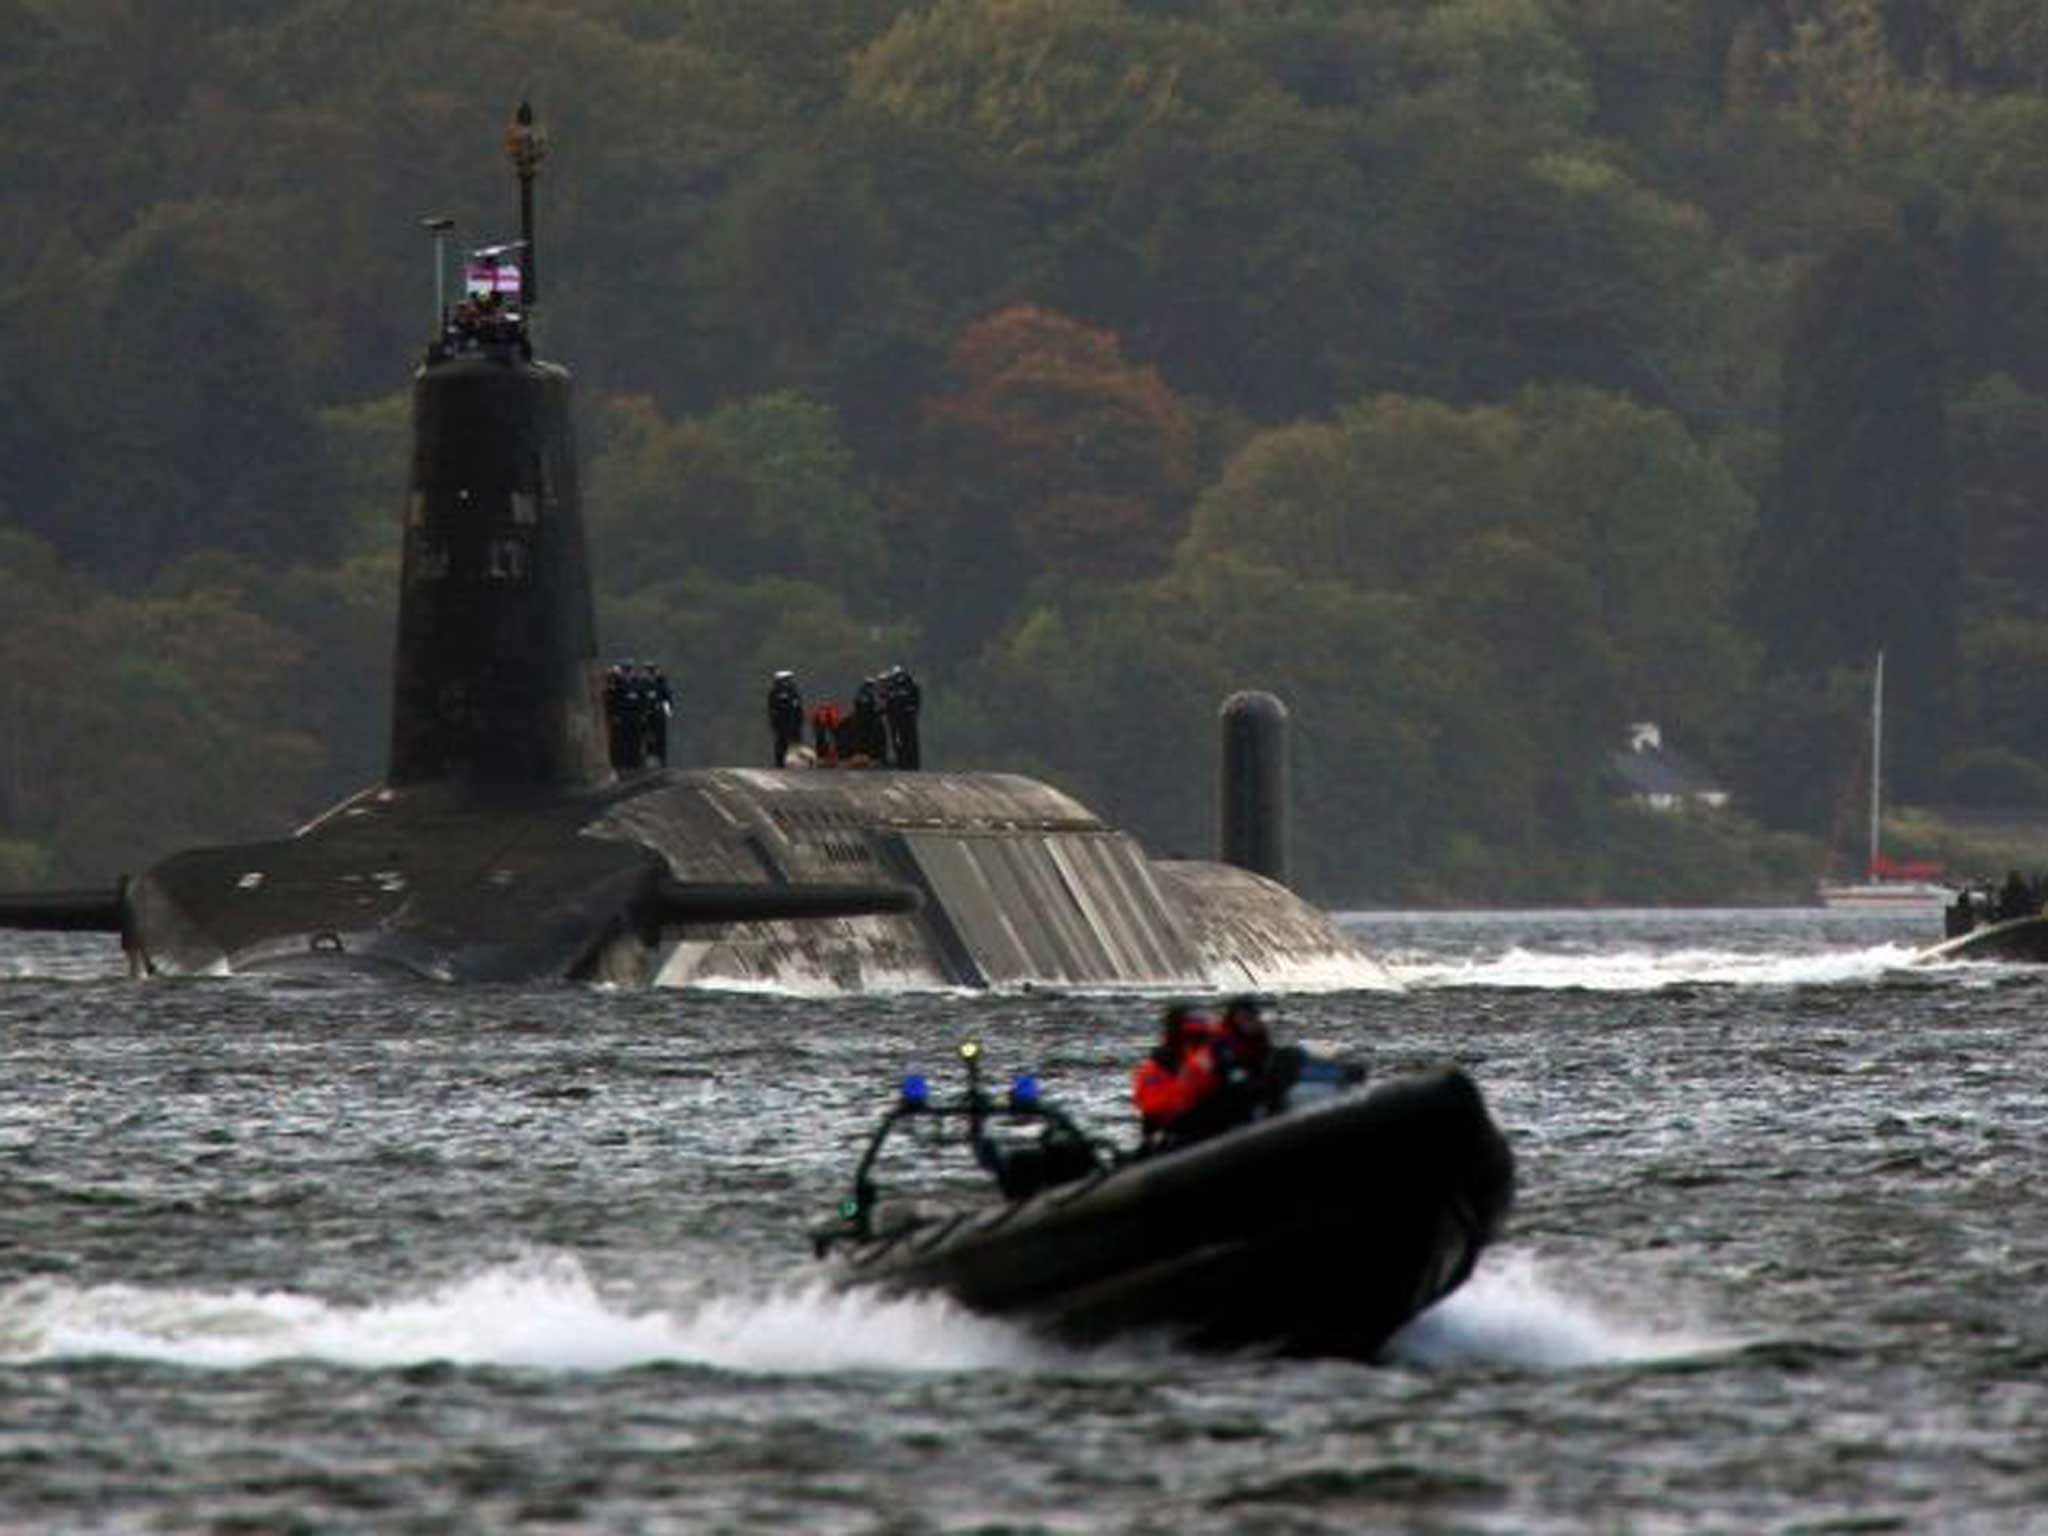 SNP leader Nicola Sturgeon says Trident renewal remains a 'red line' issue